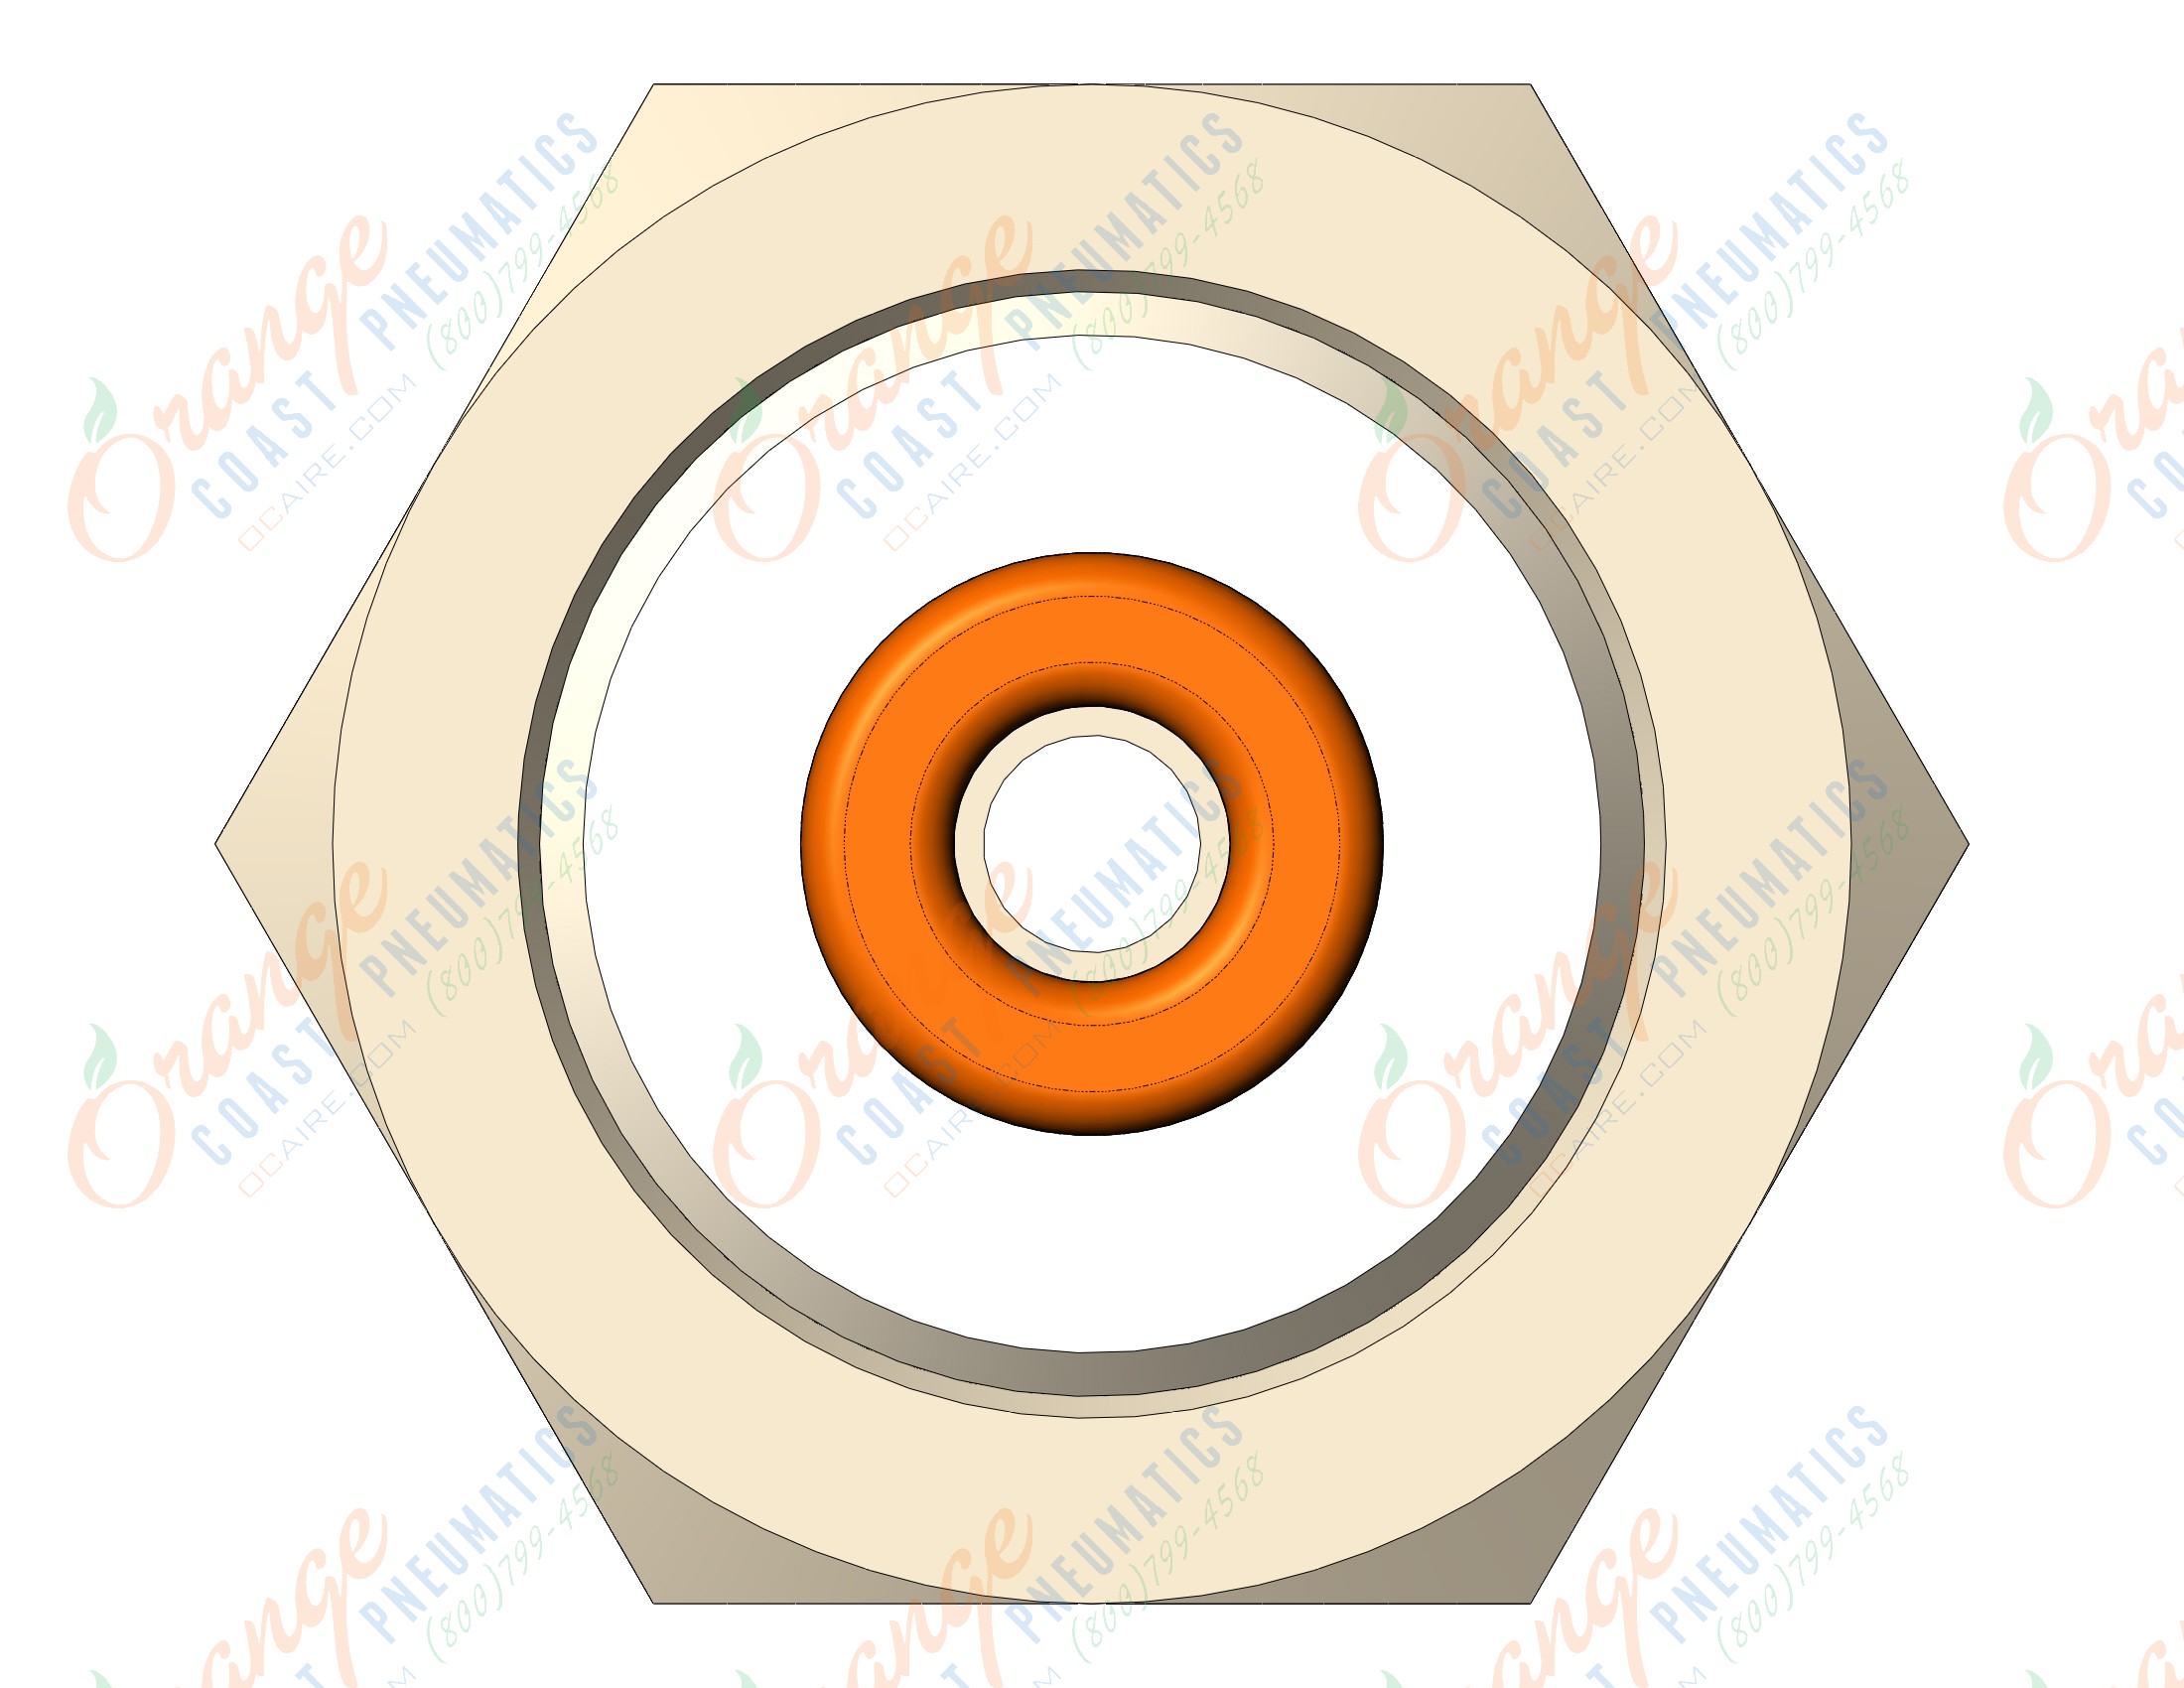 SMC KQ2E01-00A fitting, bulkhead union, KQ2 FITTING (sold in packages of 10; price is per piece)